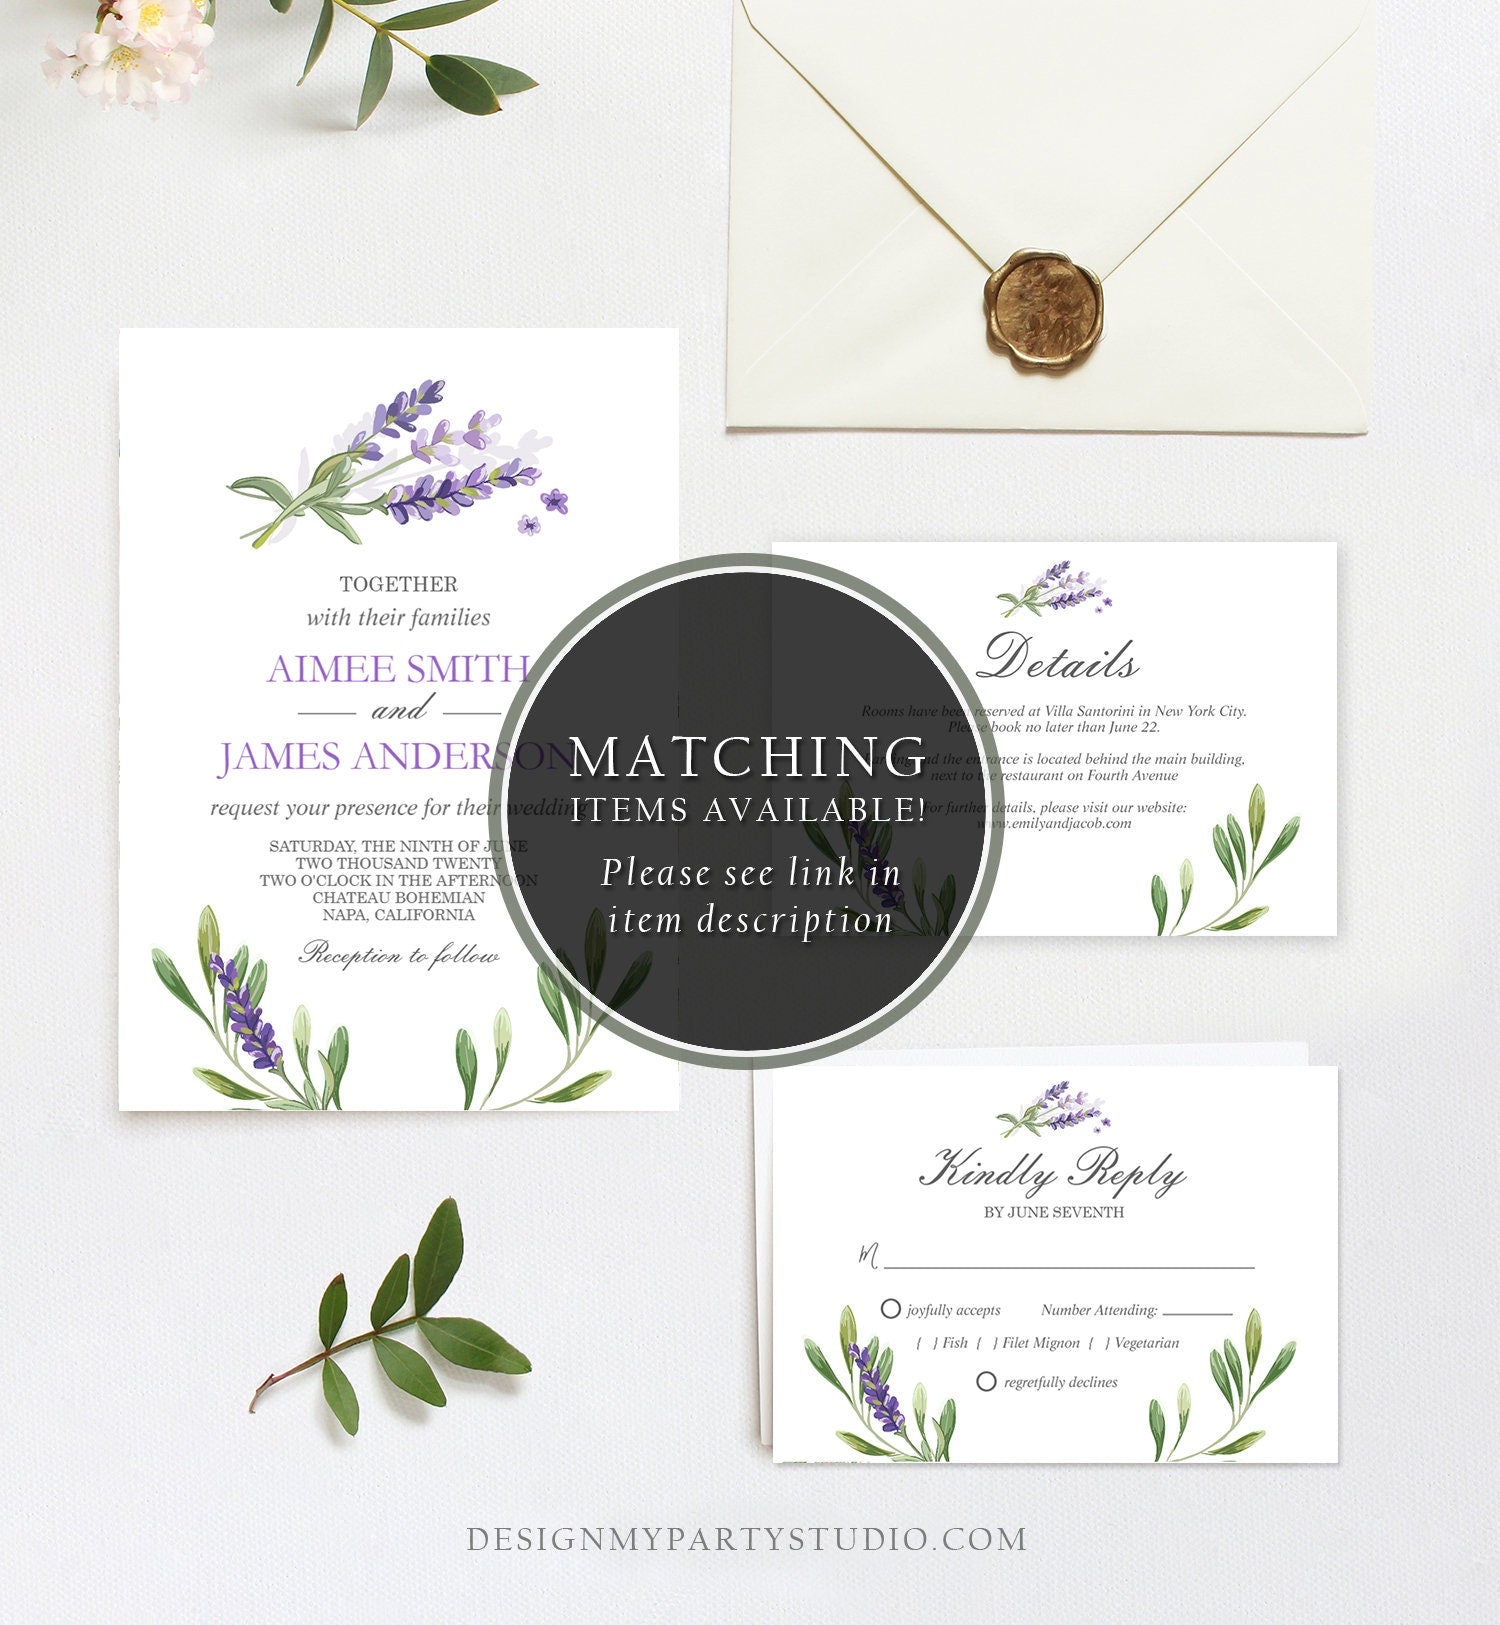 Cards and Gifts Sign Wedding Lavender Cards and Gifts Greenery Gift Table Sign Botanical Decor Floral 8x10 Instant Download PRINTABLE 0206